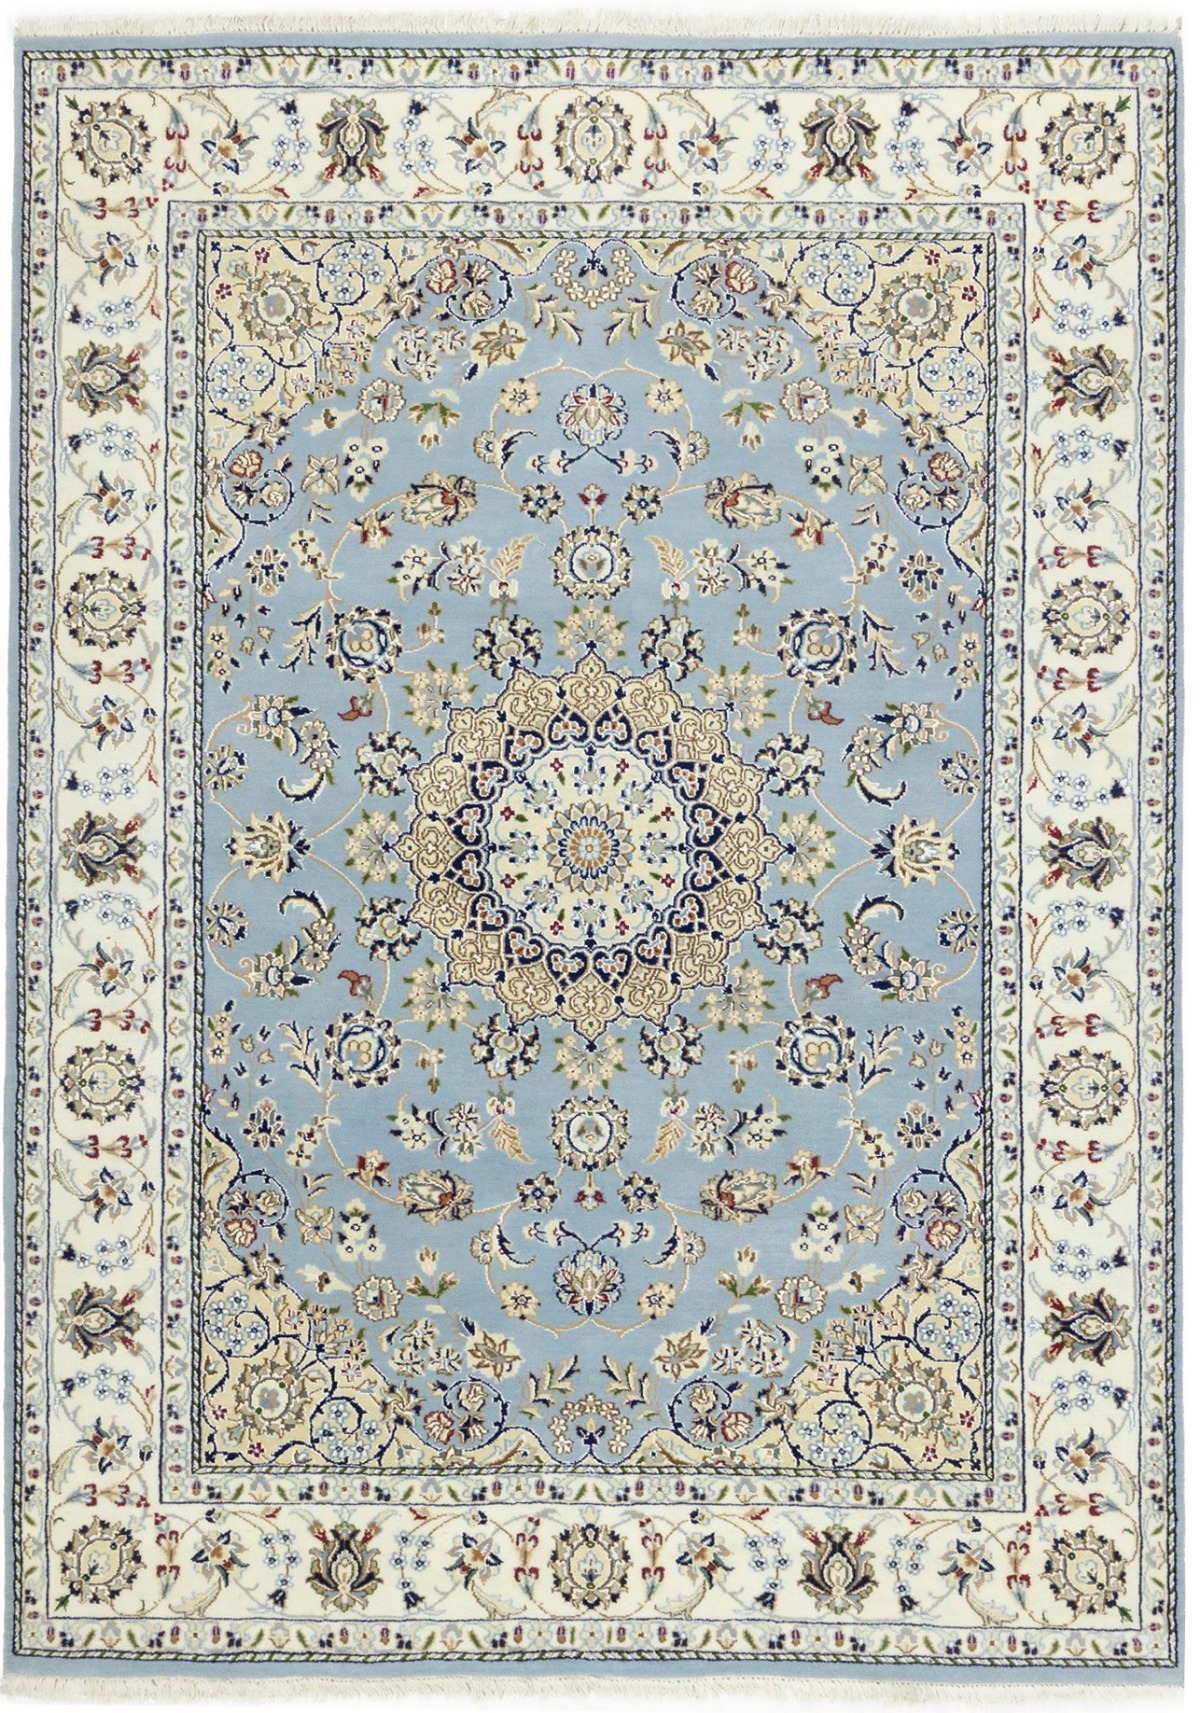 Light Blue-gray Floral 5X7 Indo-Nain Oriental Rug